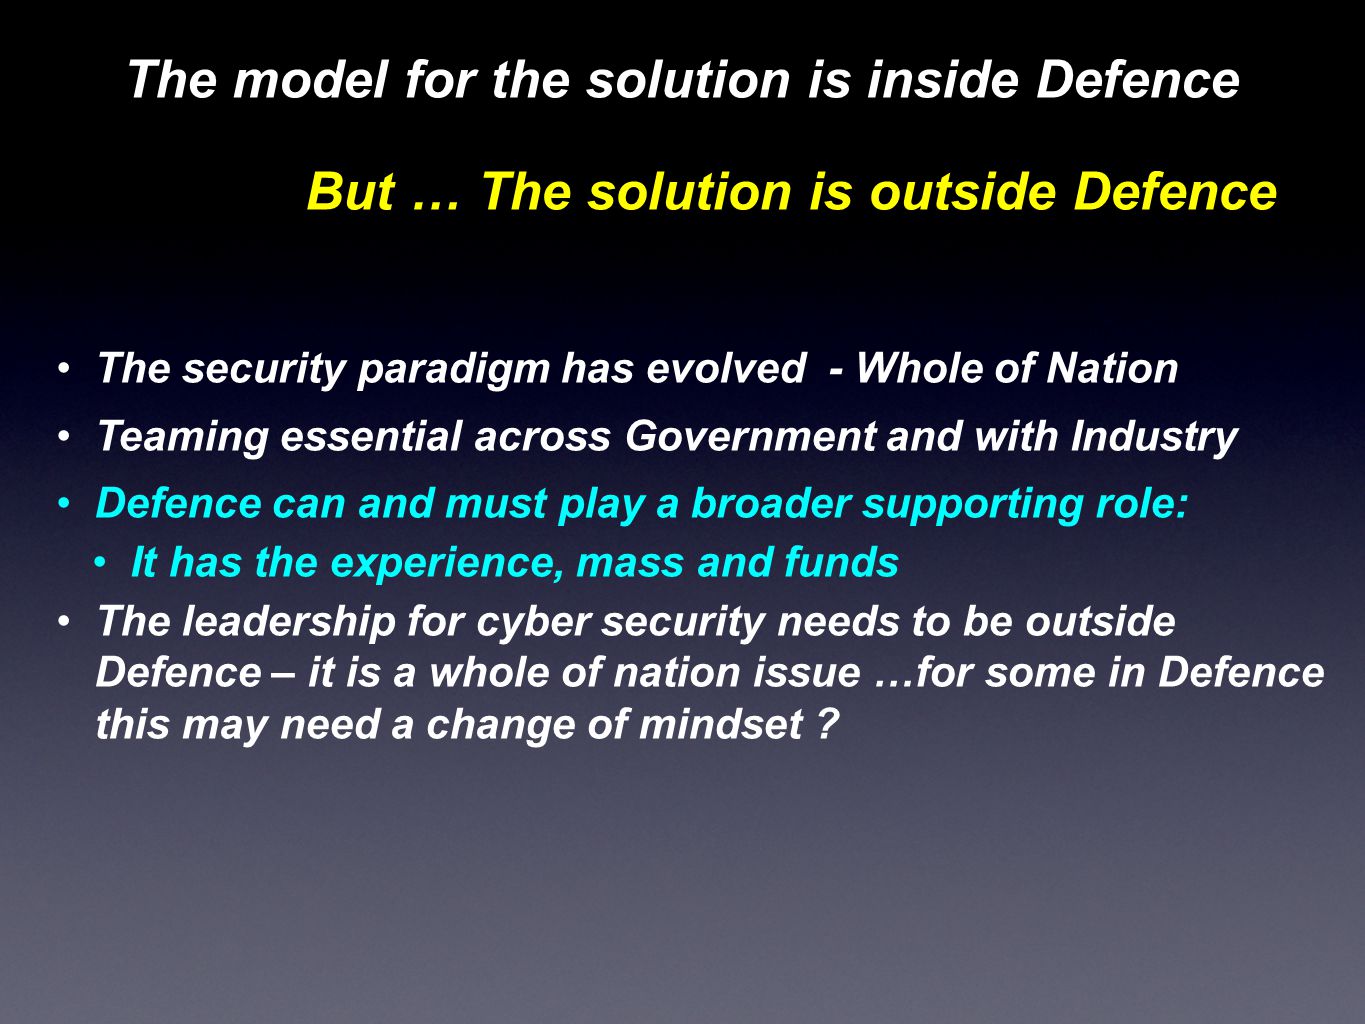 The model for the solution is inside Defence But … The solution is outside Defence The security paradigm has evolved - Whole of Nation Teaming essential across Government and with Industry Defence can and must play a broader supporting role: It has the experience, mass and funds The leadership for cyber security needs to be outside Defence – it is a whole of nation issue …for some in Defence this may need a change of mindset